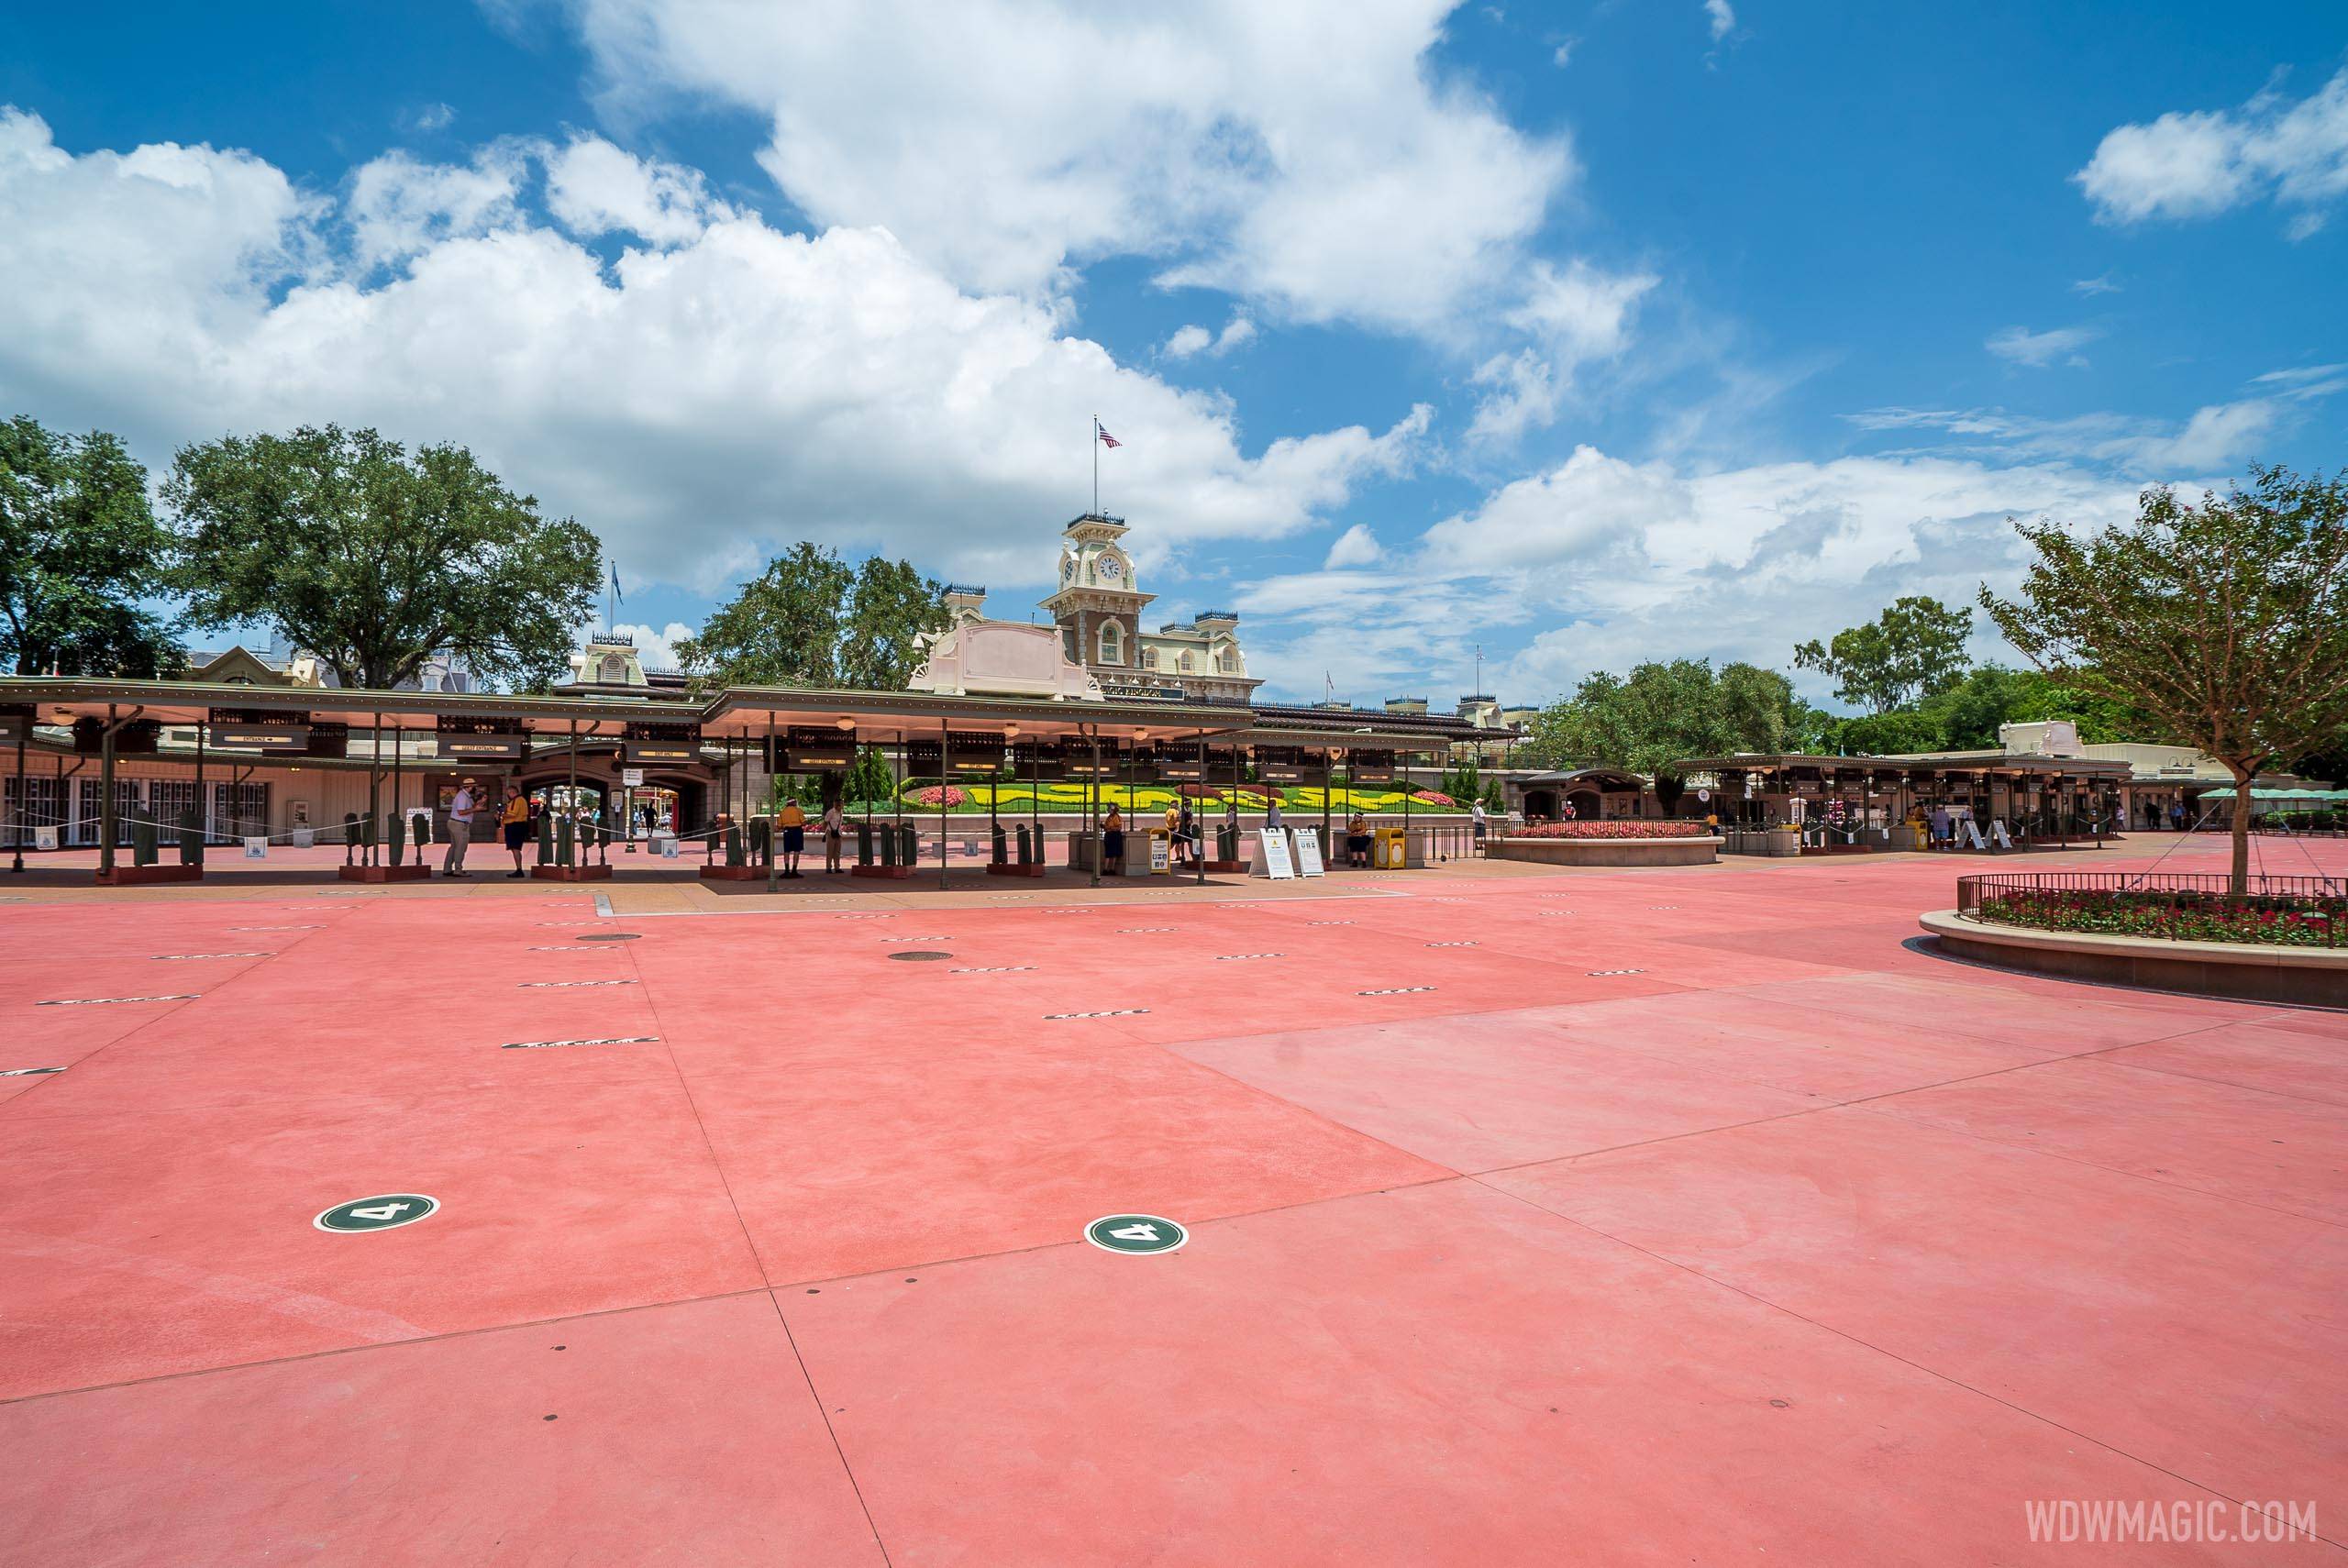 An empty midday entrance at the Magic Kingdom - a sight unseen until COVID-19 restrictions